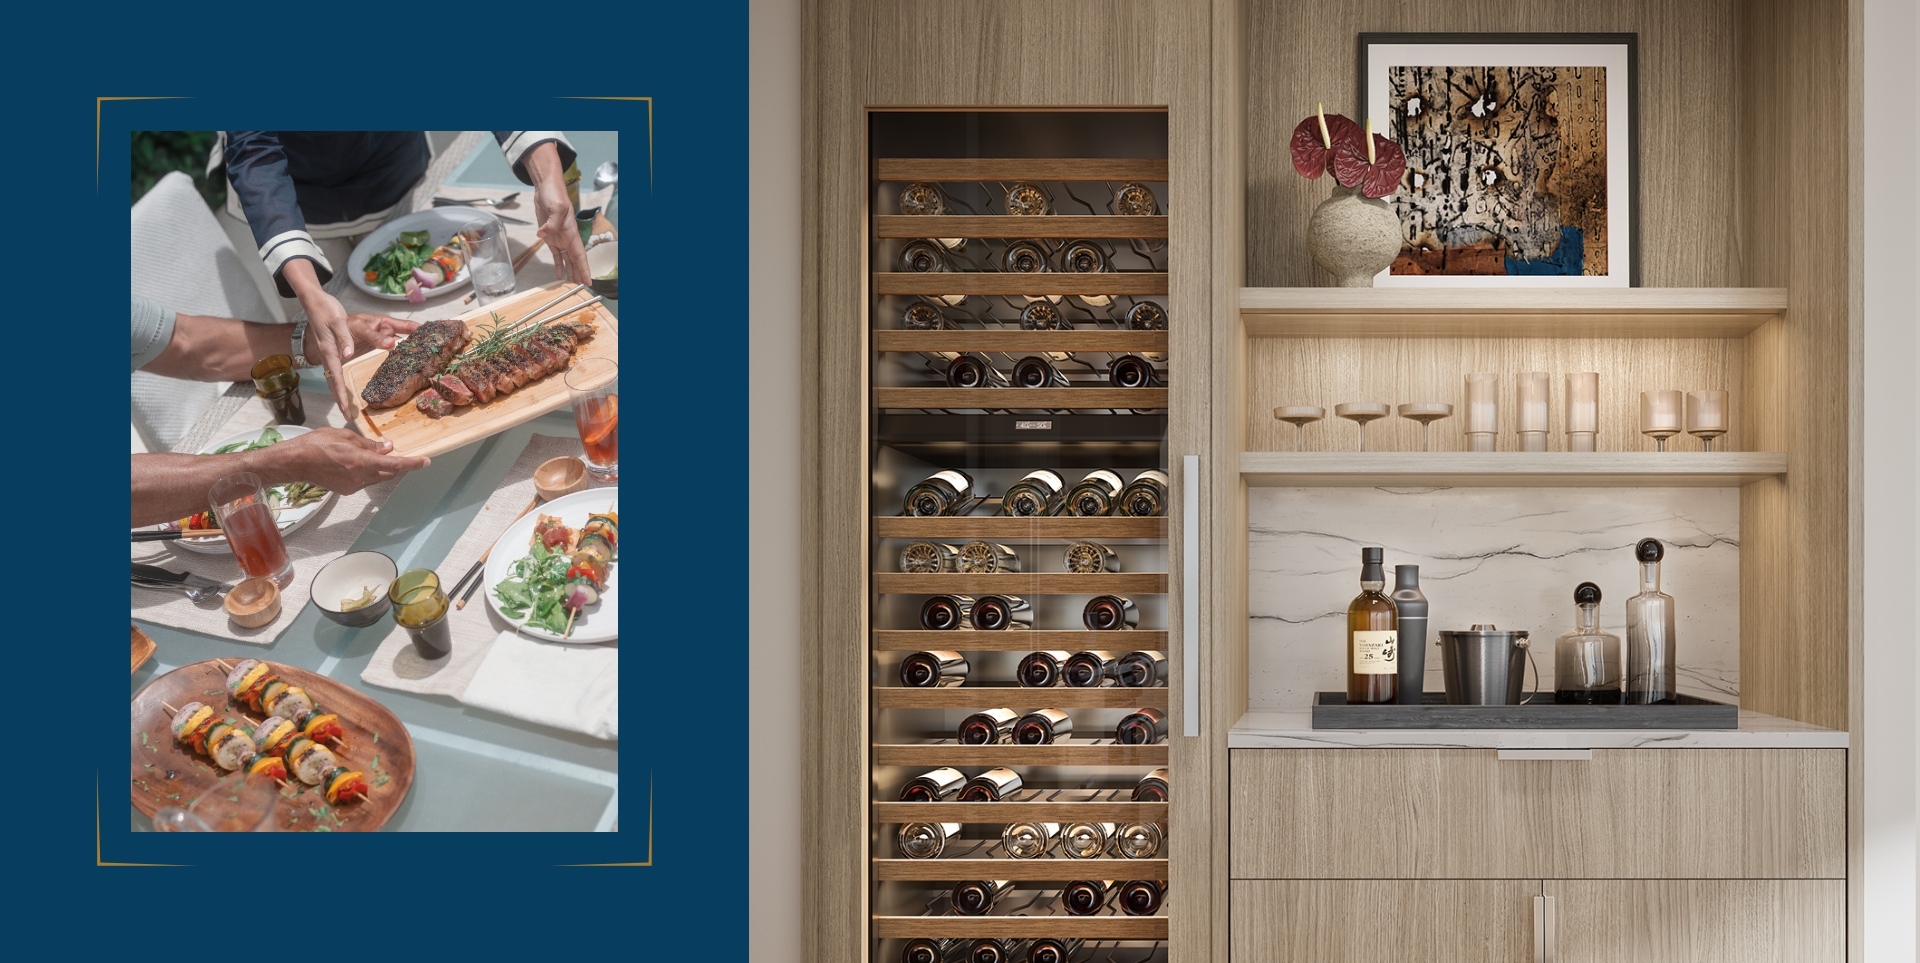 Hands passing a cutting board topped with cut steak over a dining table filled with food. Entertainment Cabinet upgrade in light color scheme showcasing a wine fridge, open shelving, cabinetry, and bar top.